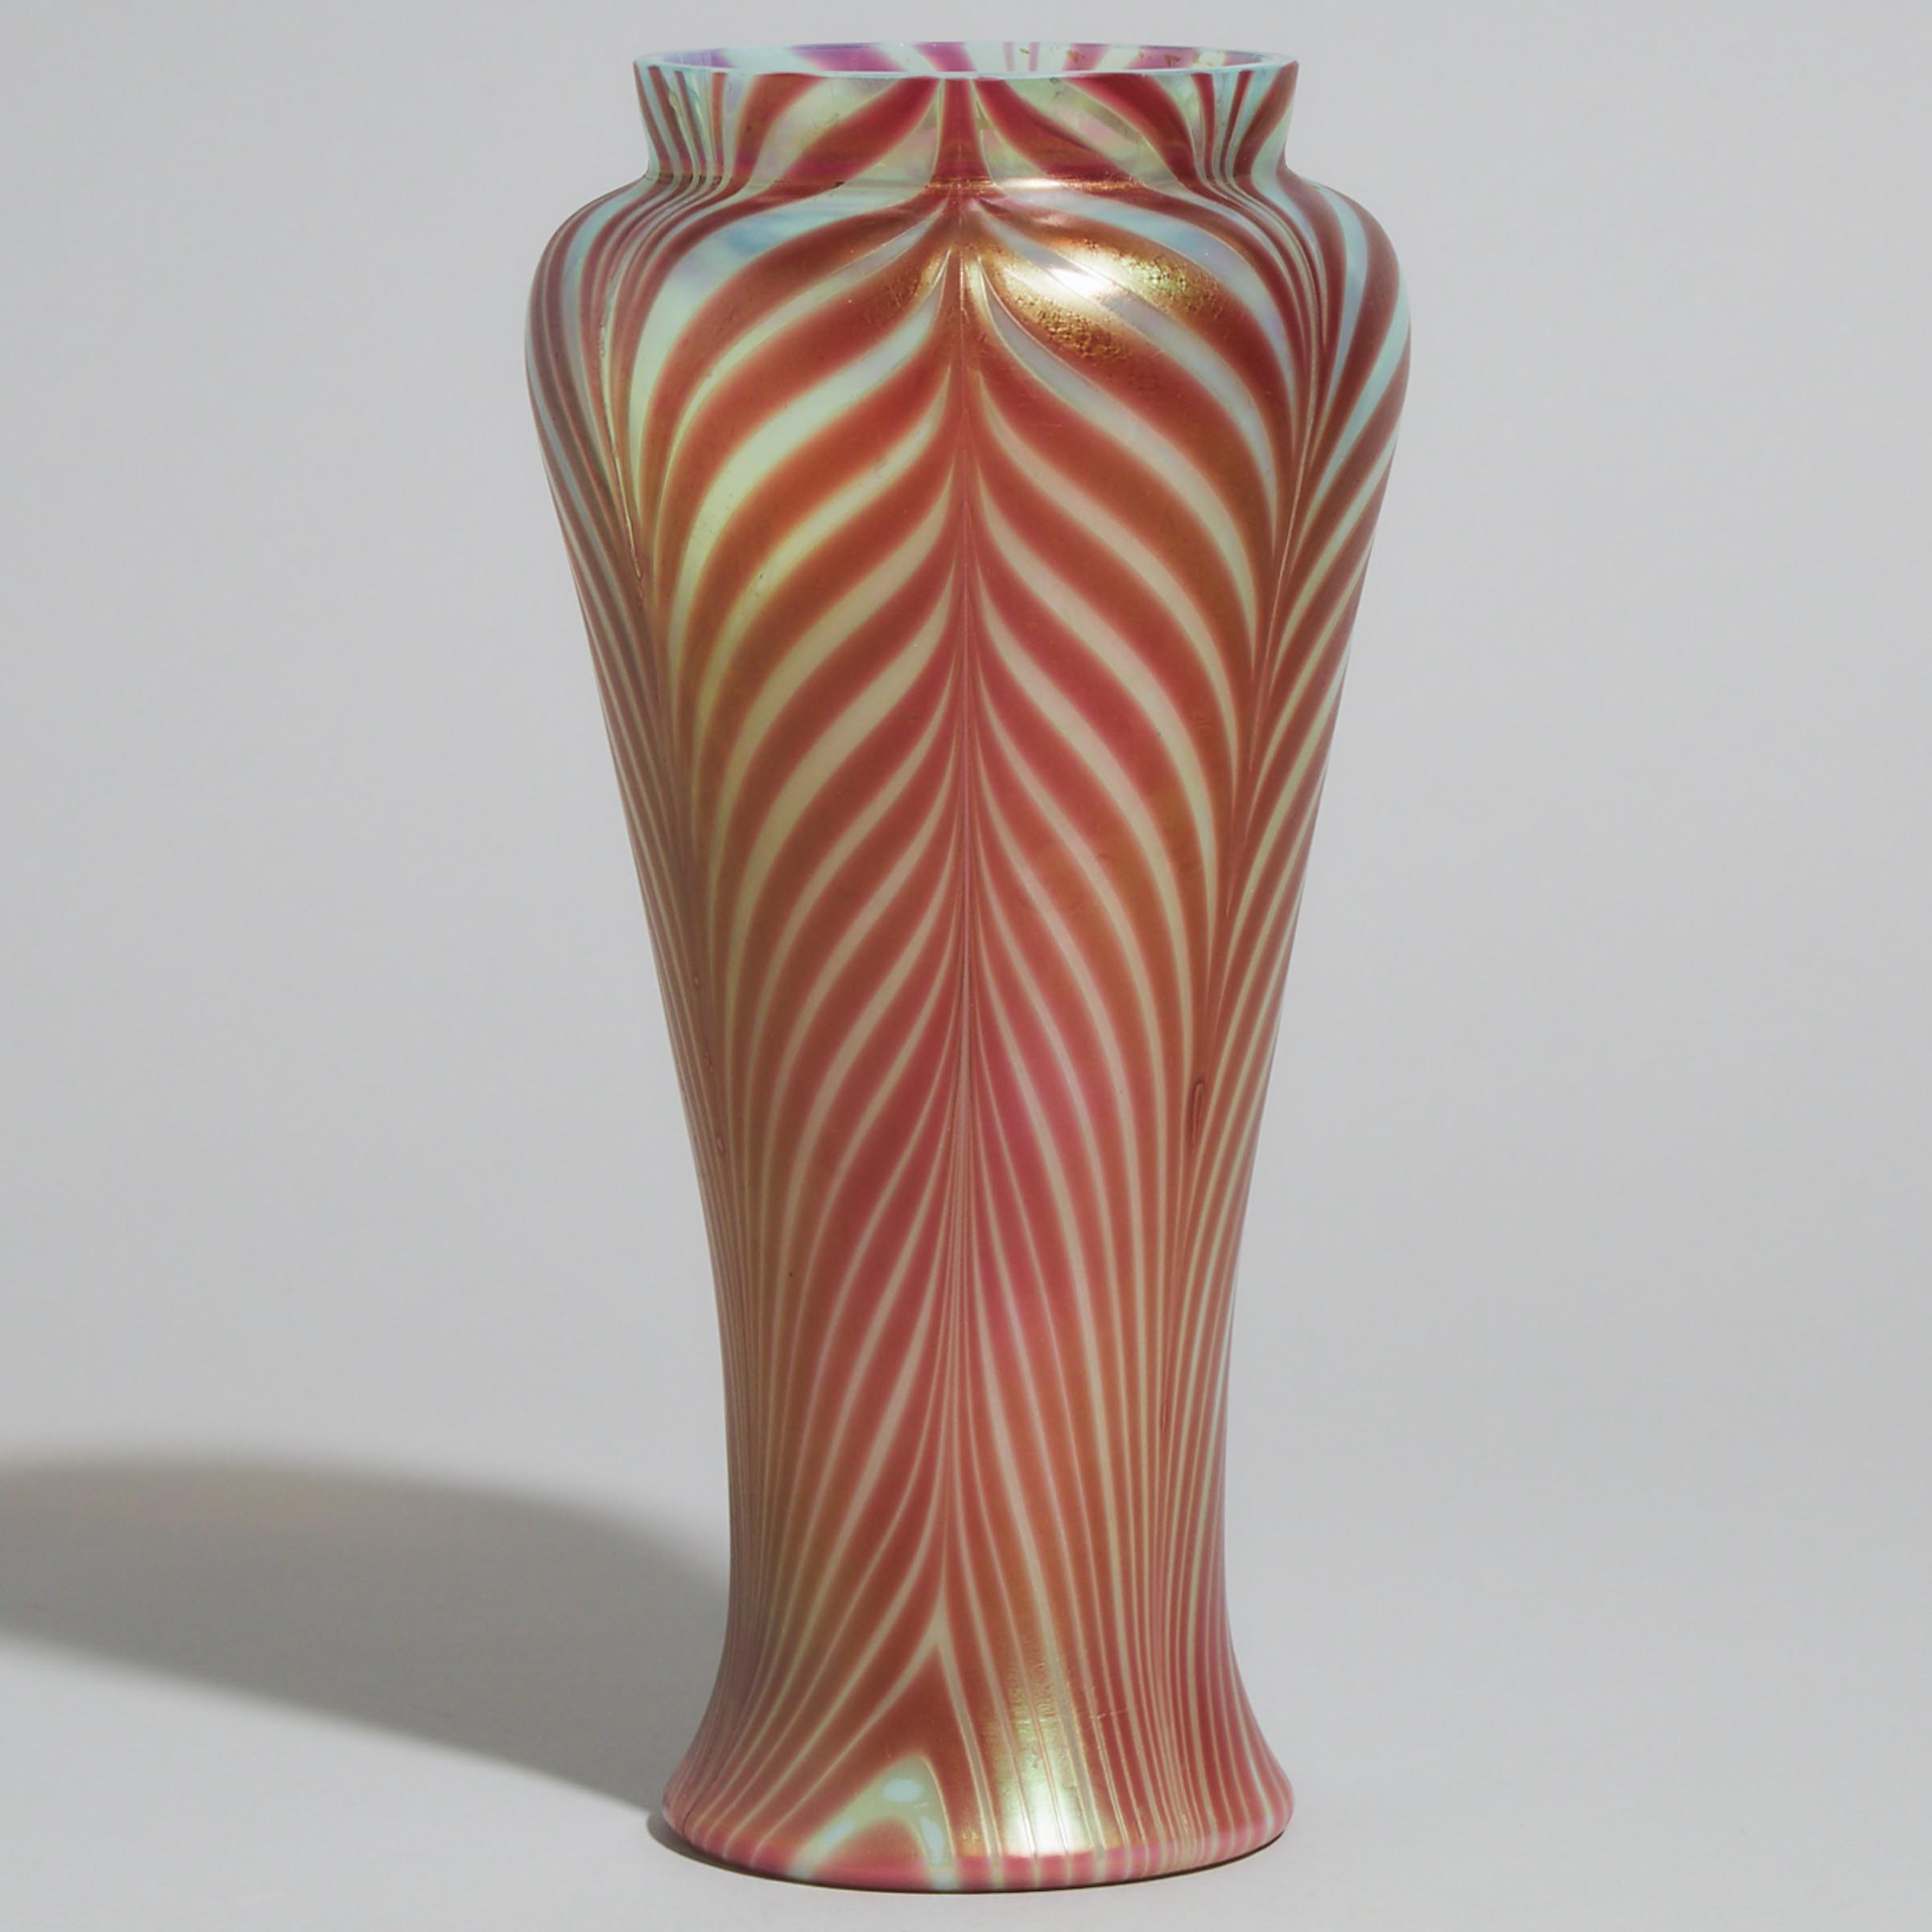 Austrian Pulled Feather Iridescent Glass Vase, early 20th century